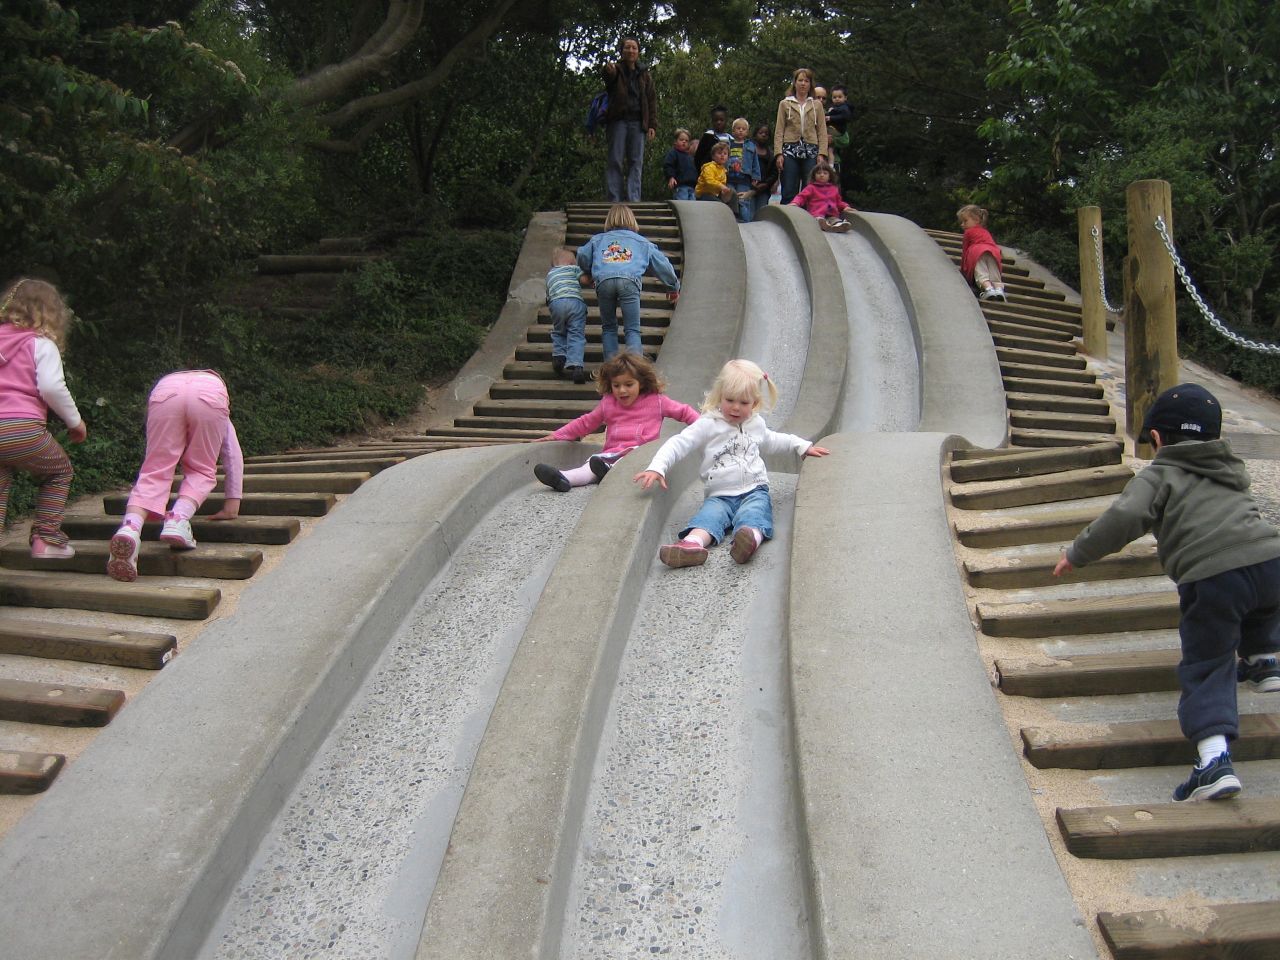 Big Slide or Not Avisable for a Two Year Old